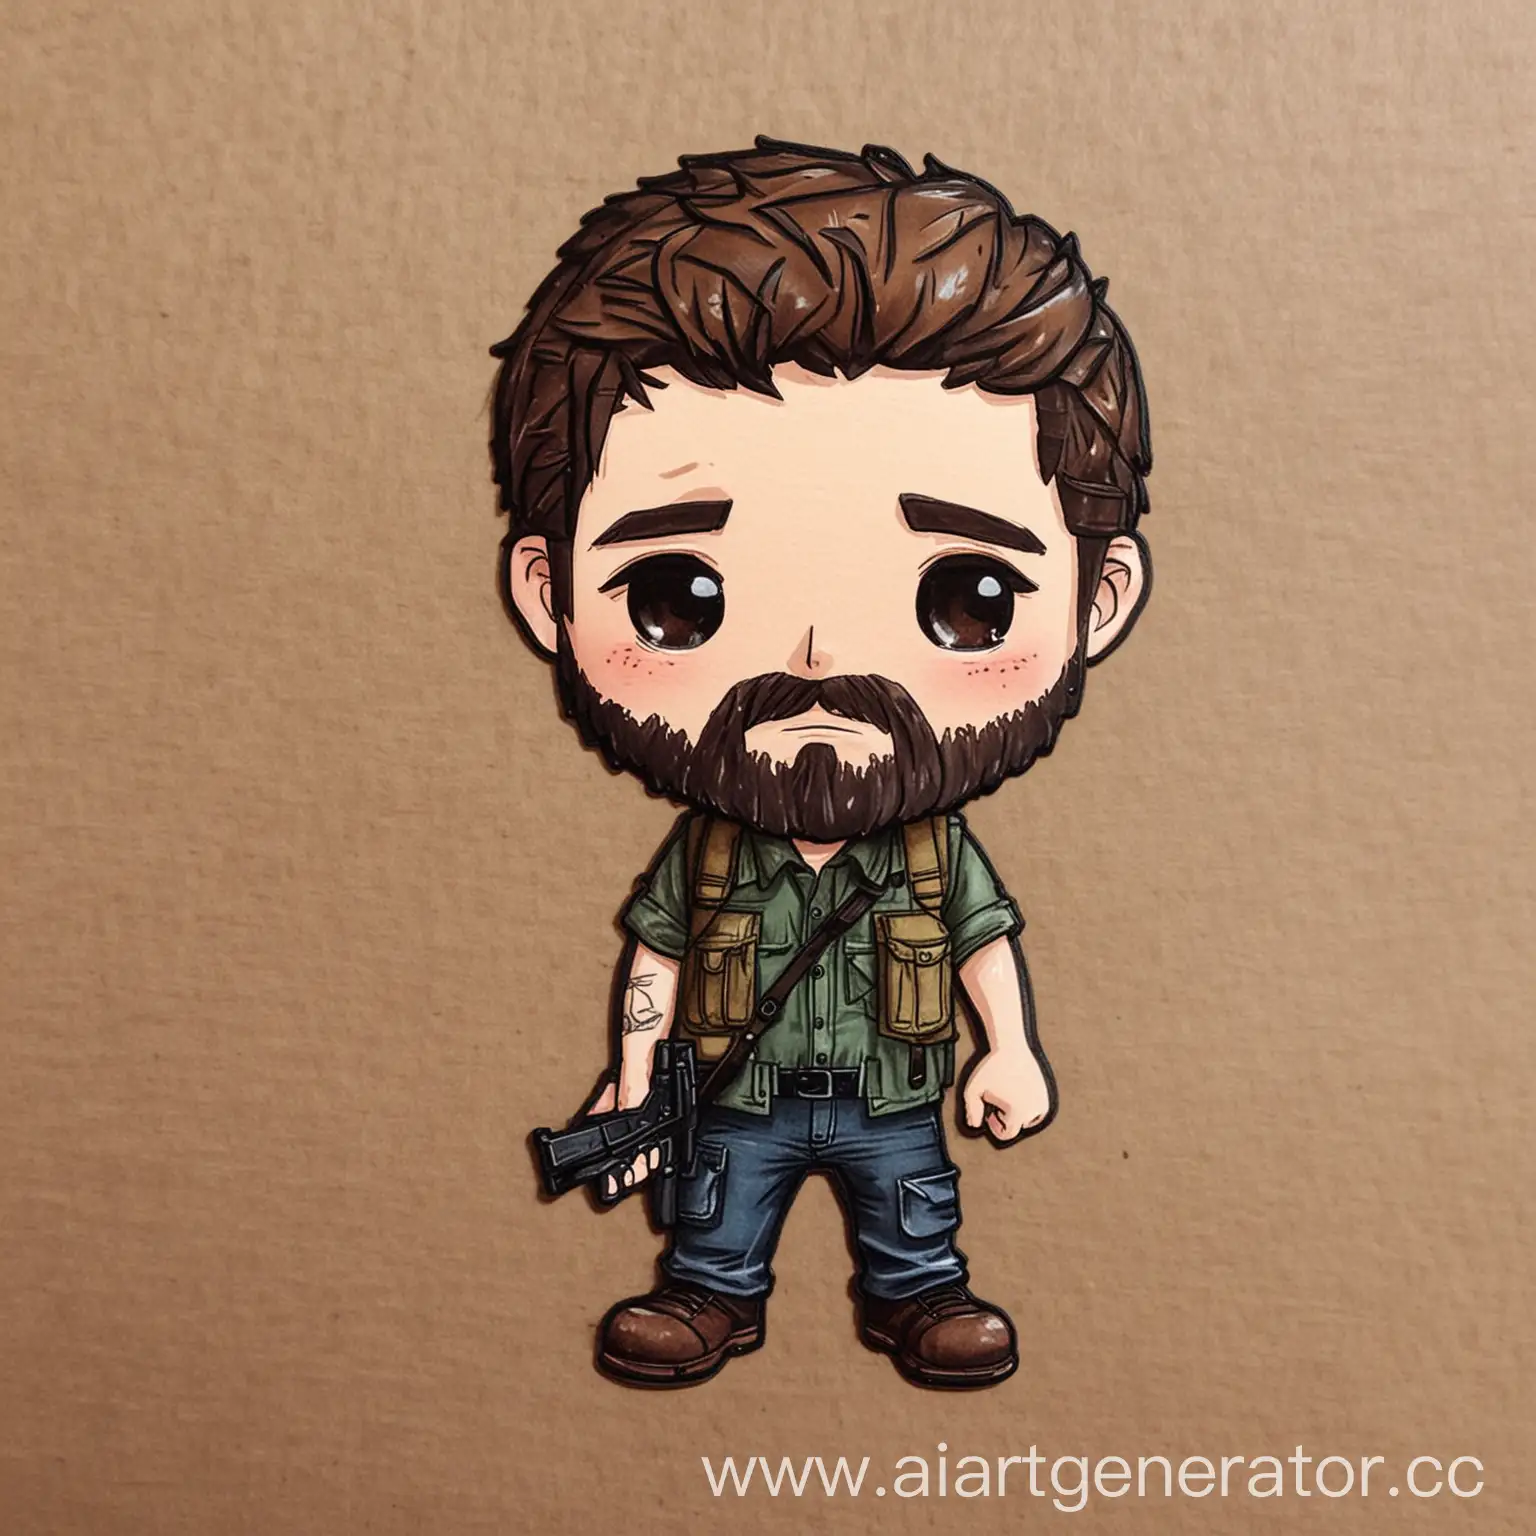 Chibi-Joel-from-The-Last-of-Us-Cute-Character-Illustration